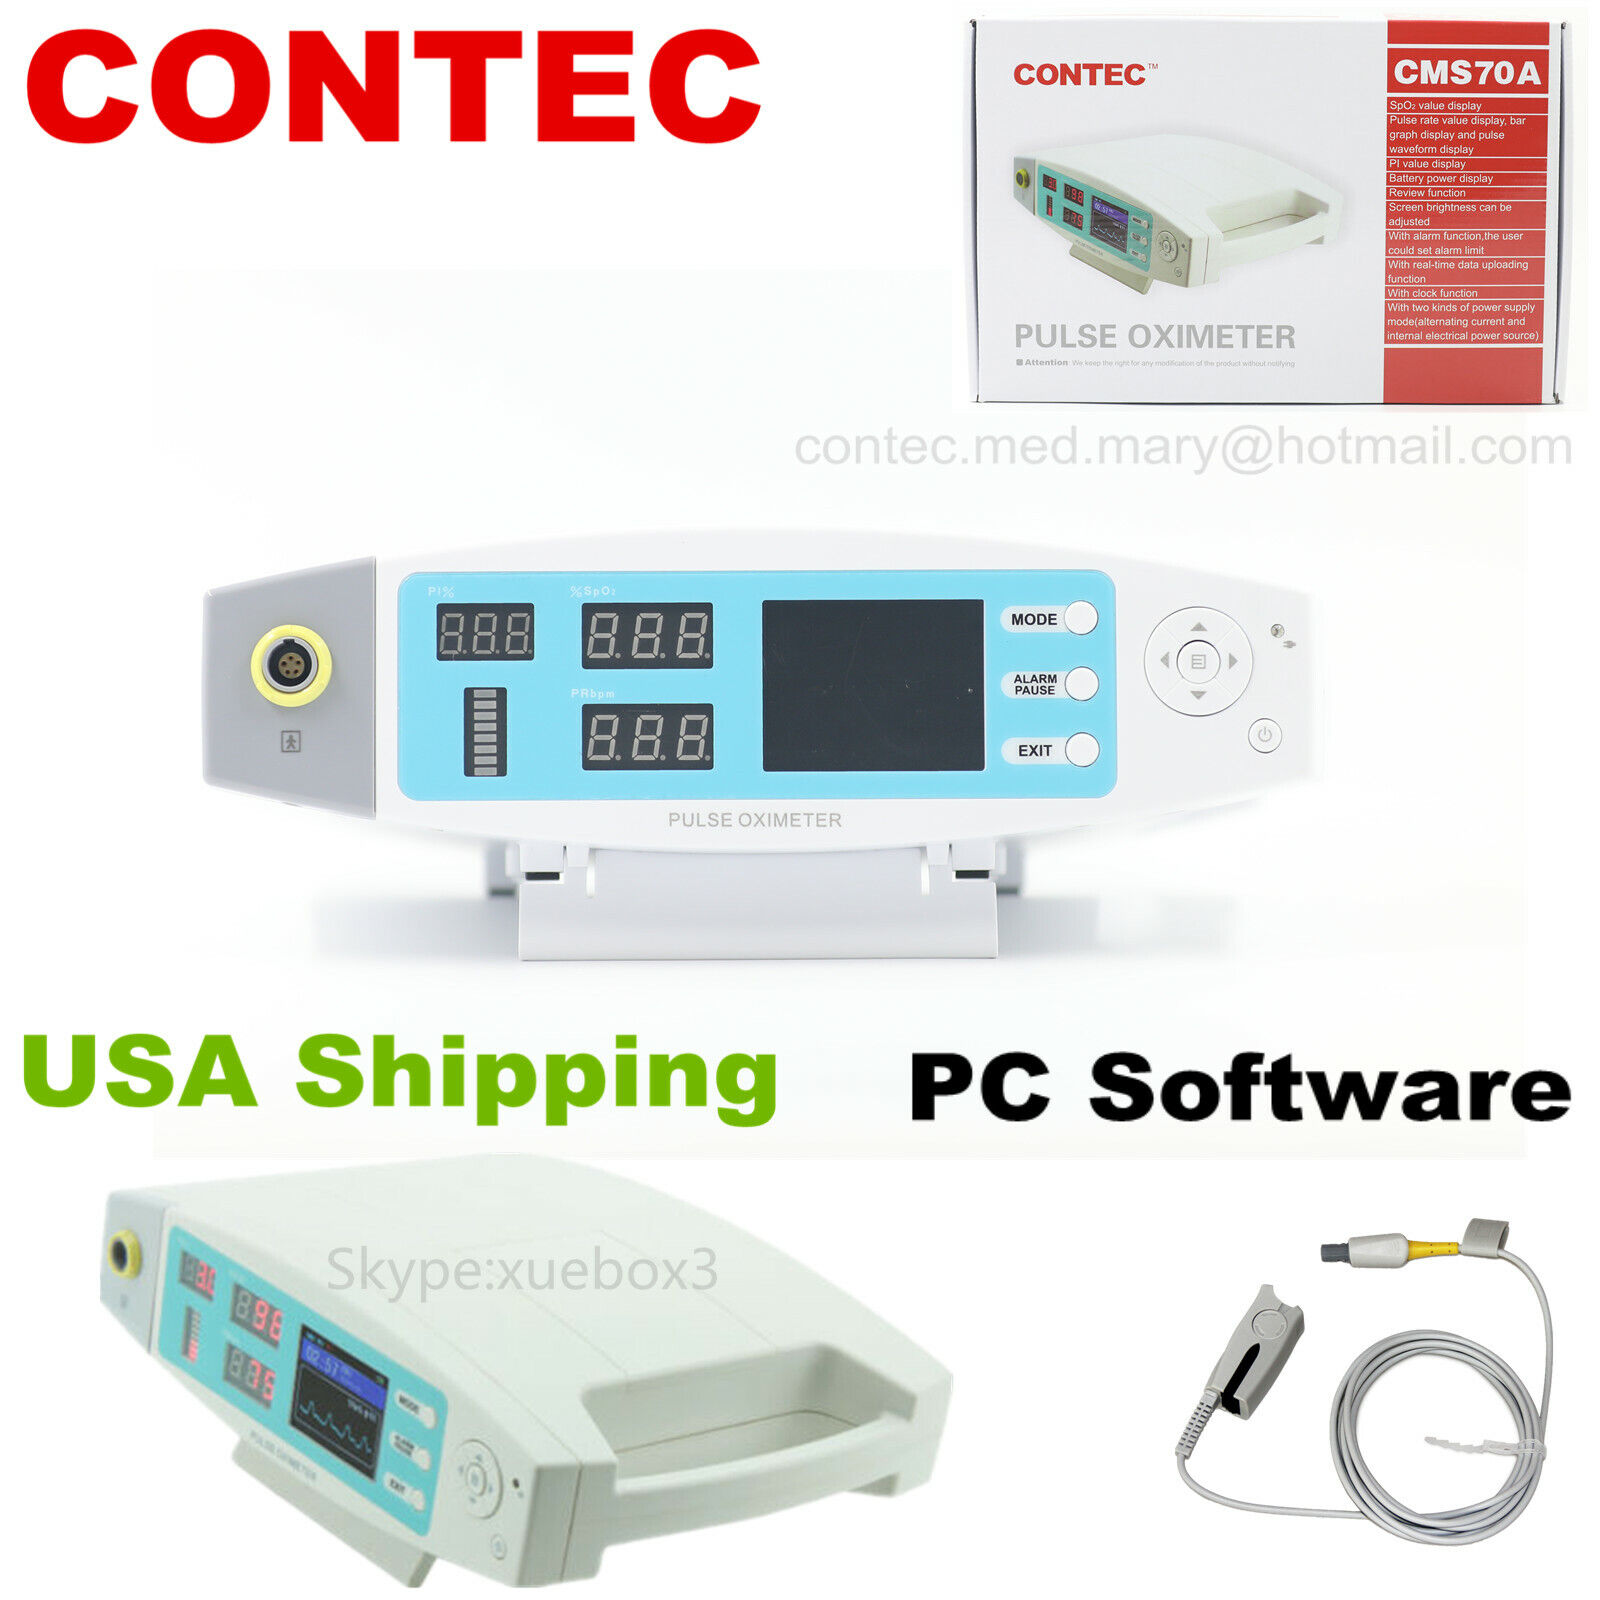 NEW spo2 PI PR Rechargeable / Mains Operated Desktop Pulse Oximeter Software USA